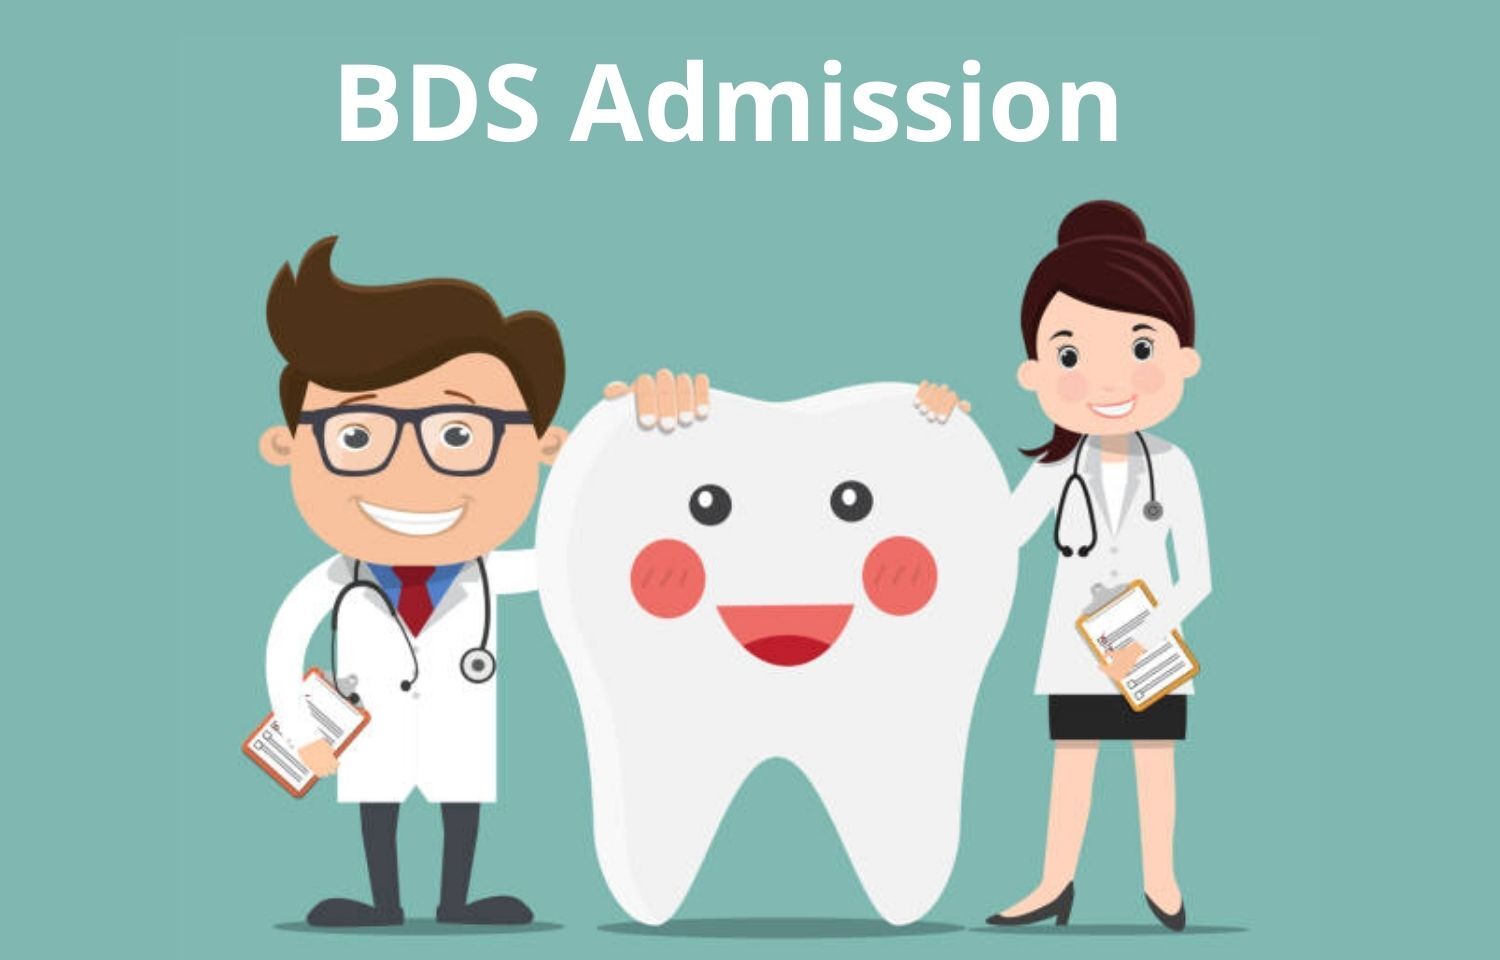 KNRUHS Notifies About Exercising Web-Options For Second Phase Counseling  For BDS Admissions